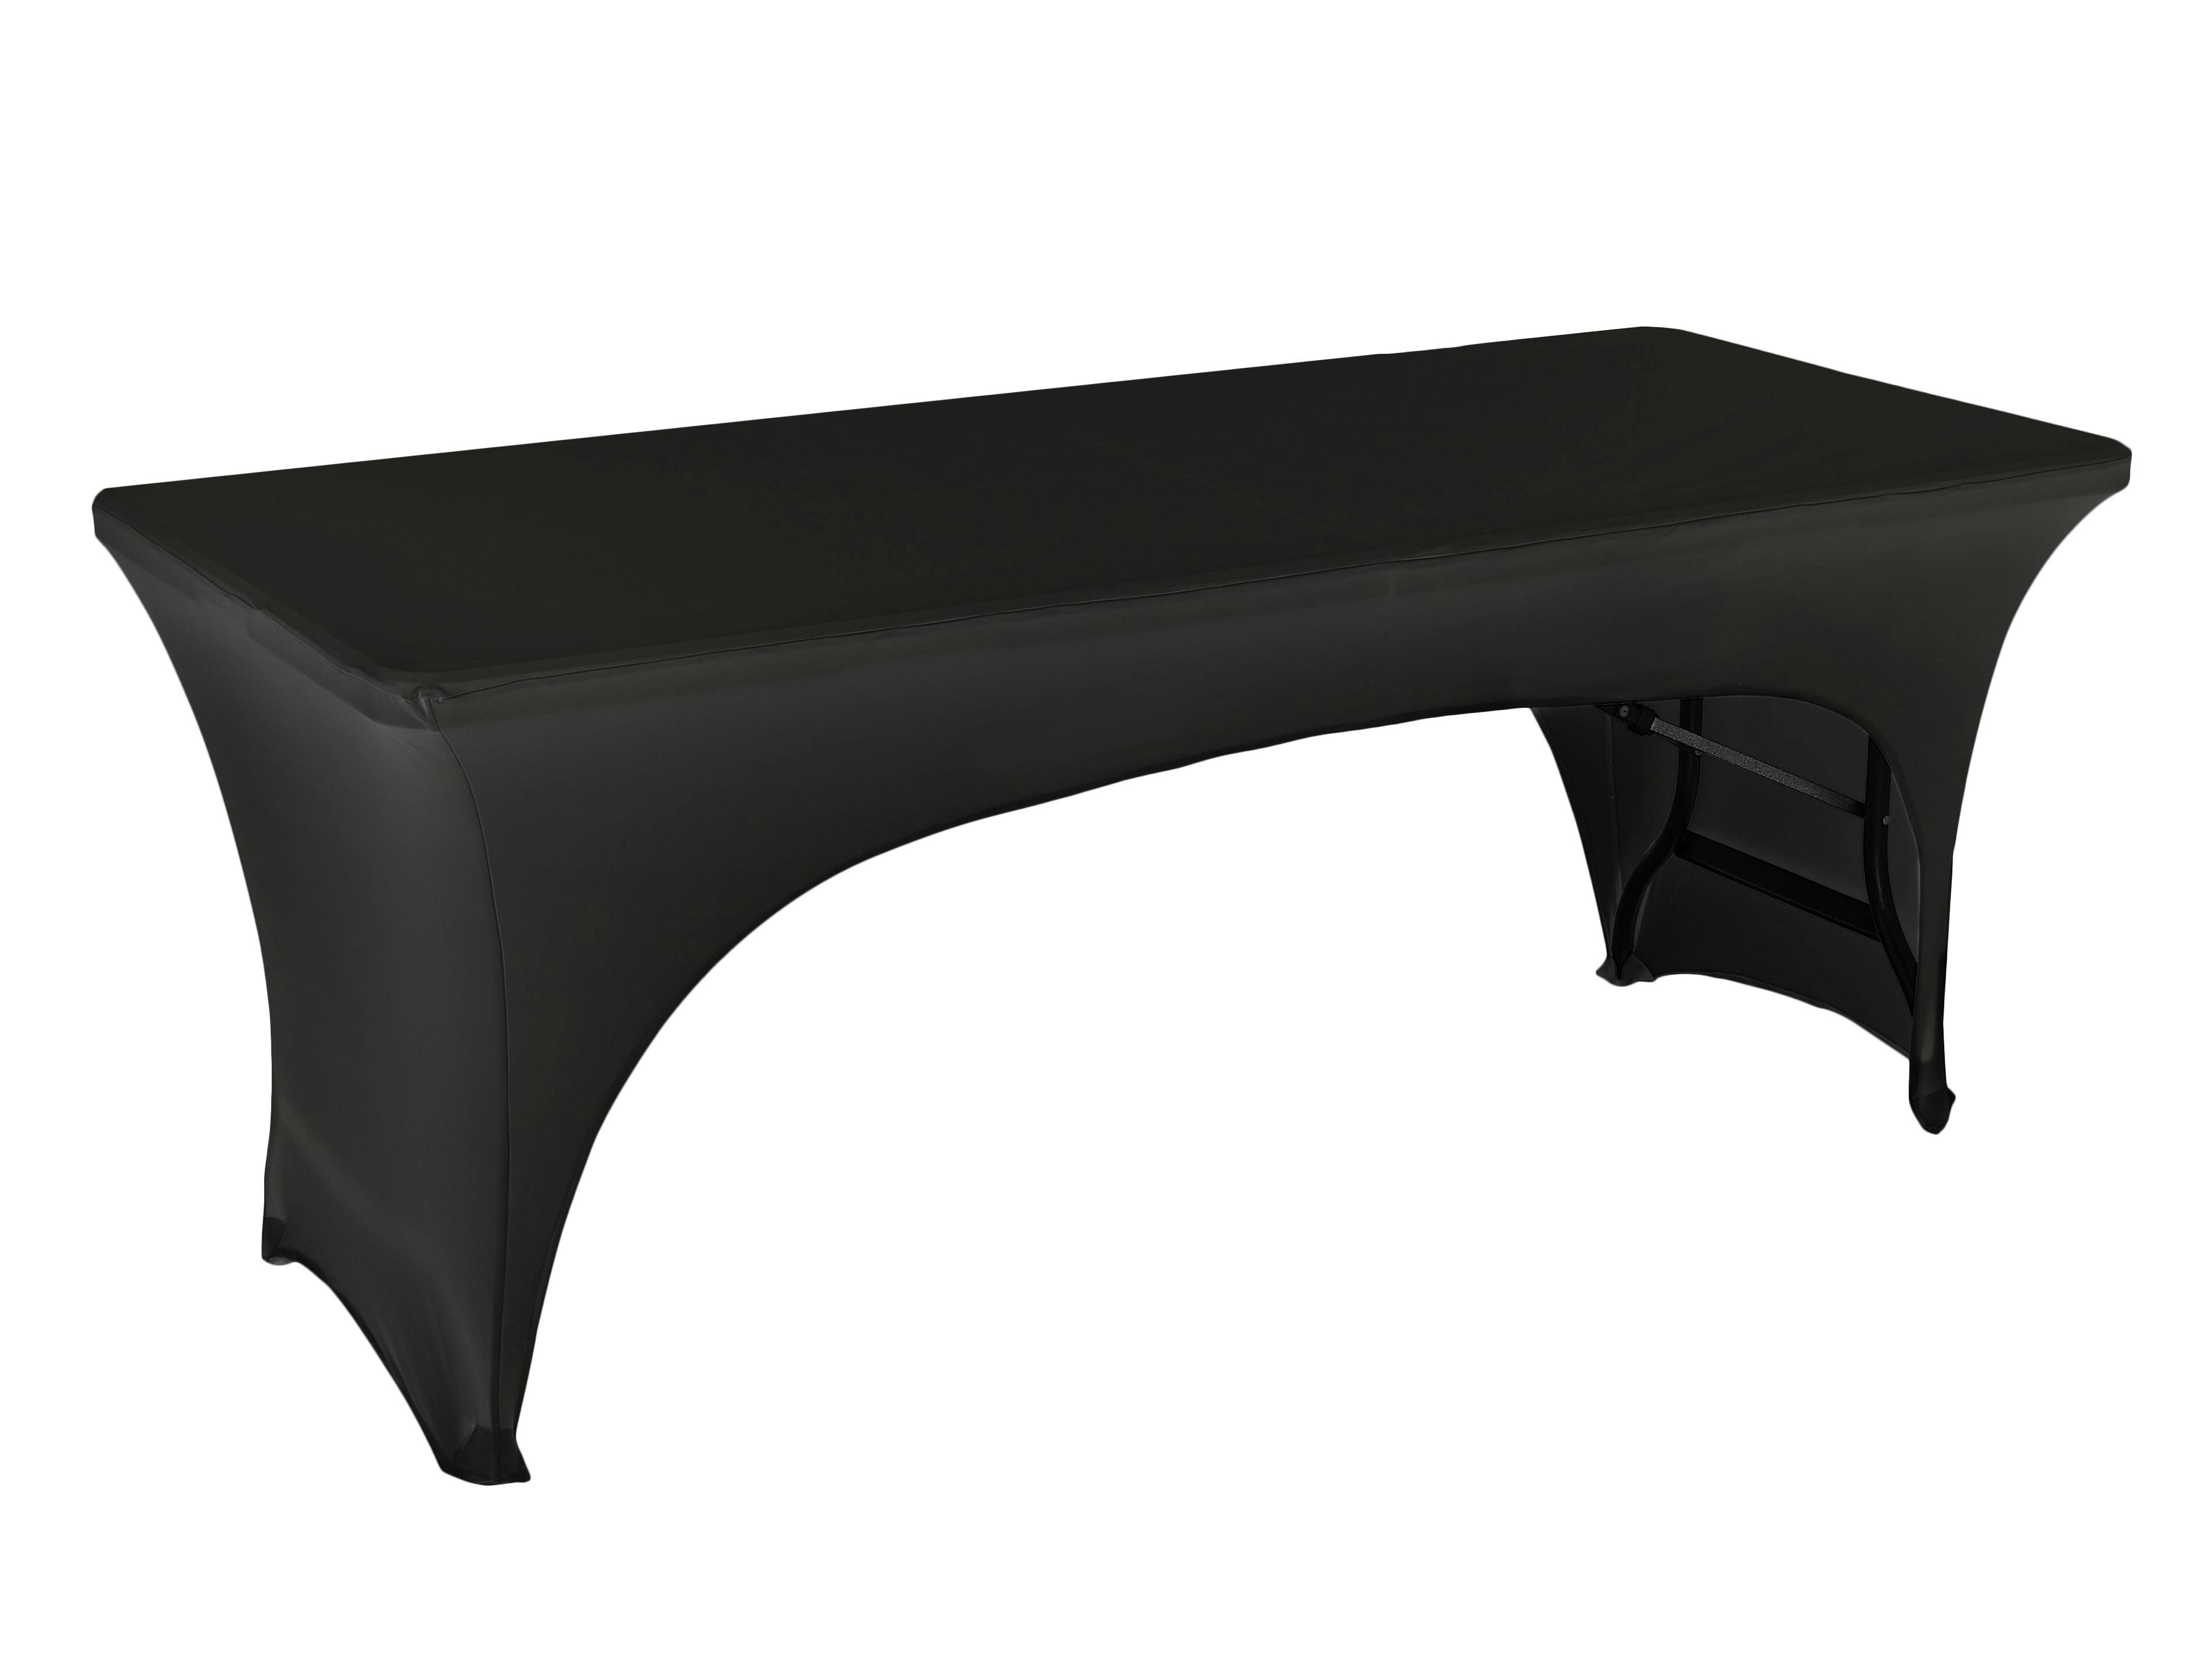 https://tradetested.imgix.net/catalog/product/_/9/_992238_stretch_fit_table_cover_rectangle_2.4m_black-1c.jpg?fit=fillmax&fill=solid&auto=format%2Ccompress